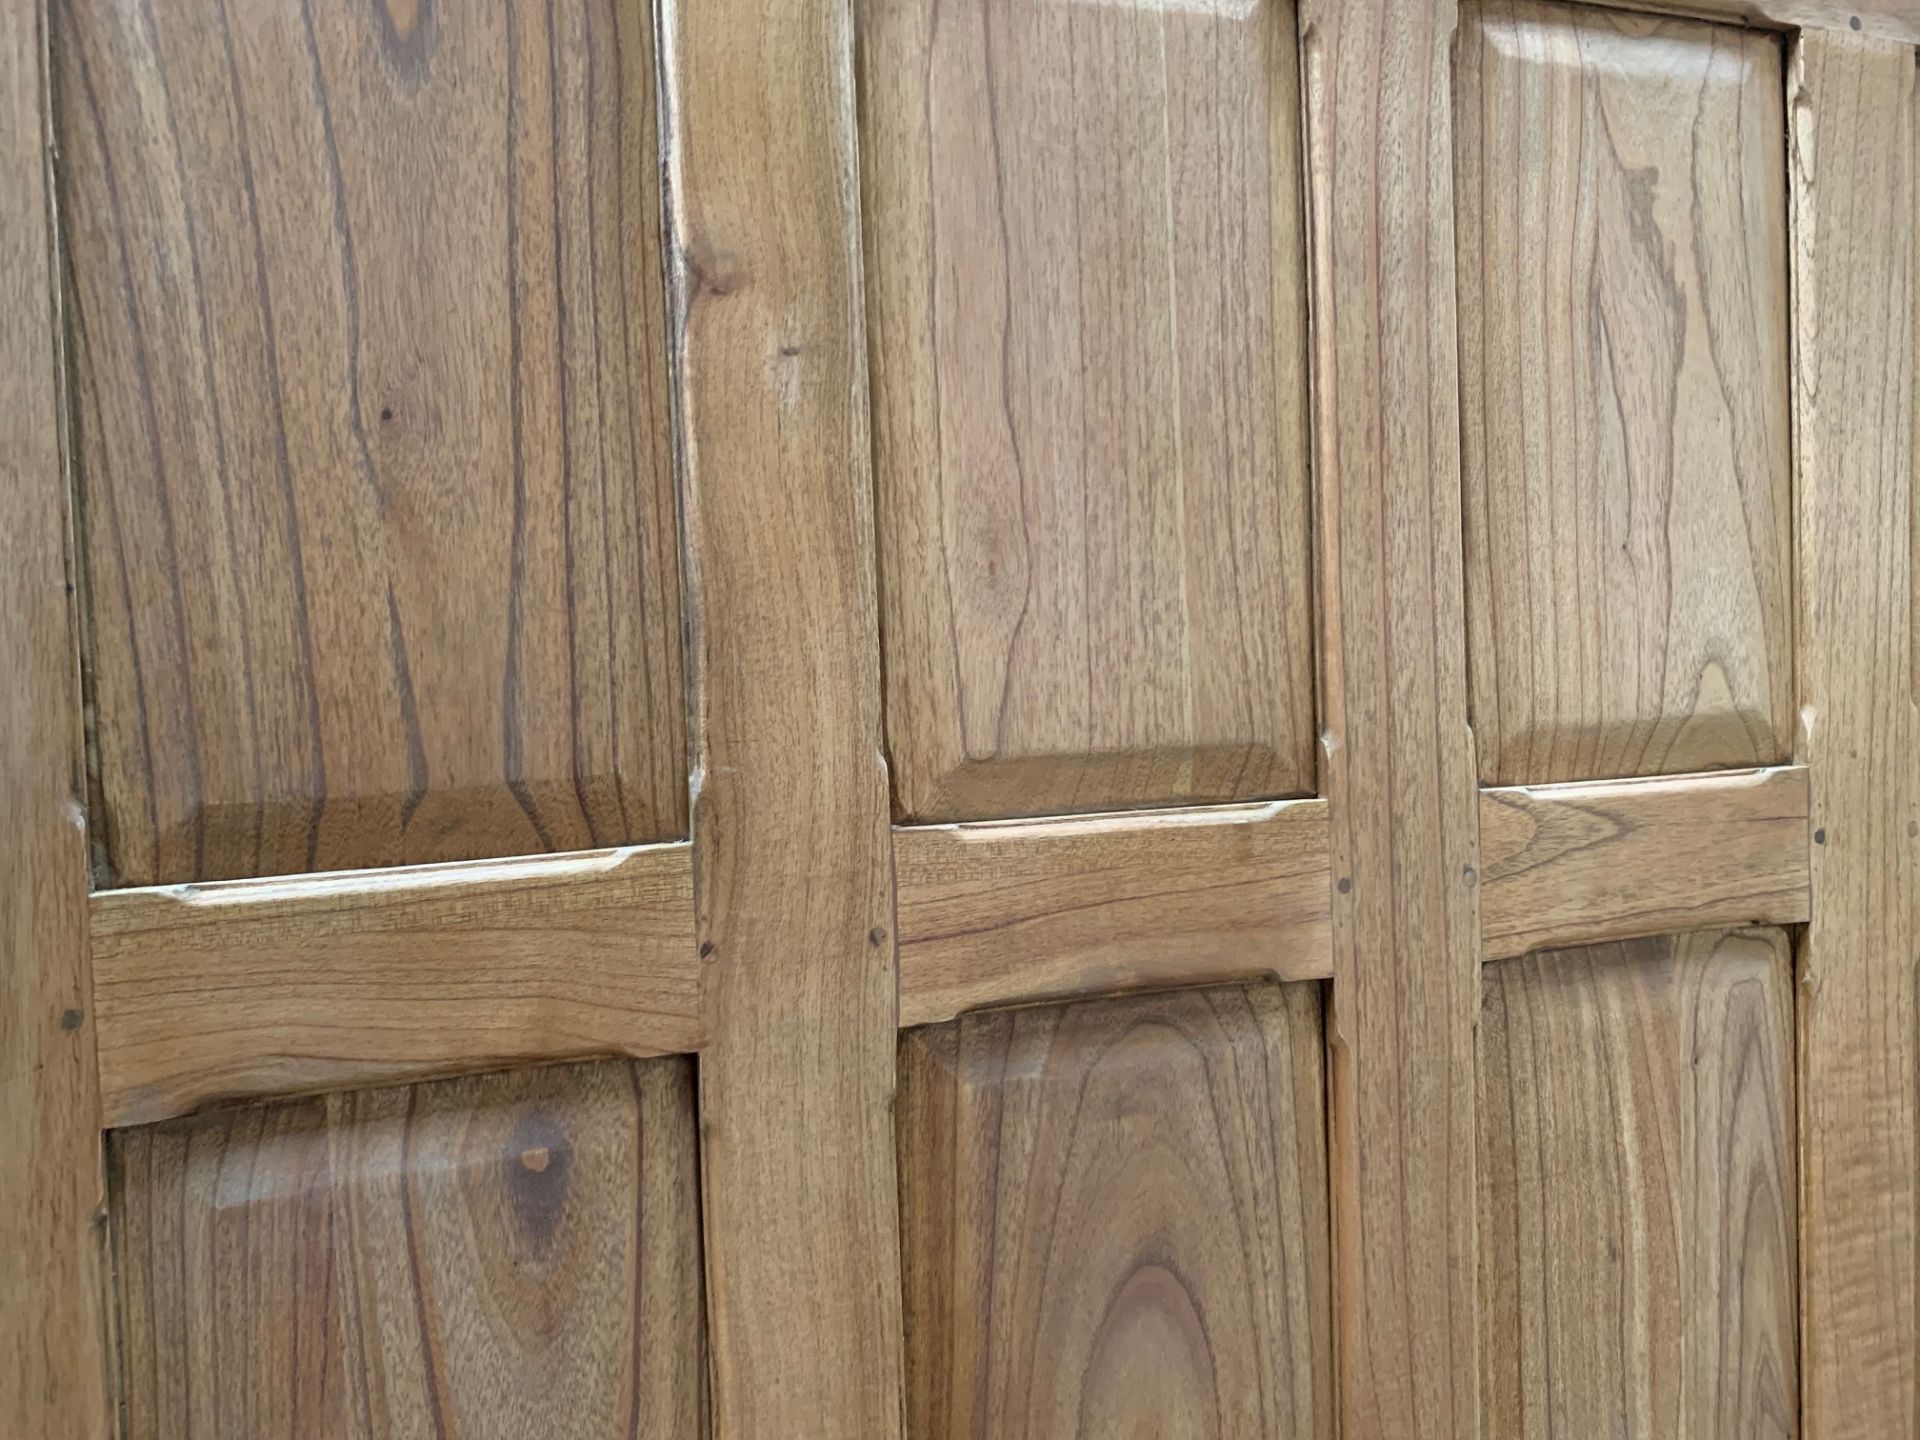 HIGH QUALITY TEAK WOOD PANEL (APPROX 1885MM TALL X 1160MM WIDE) - Image 2 of 2